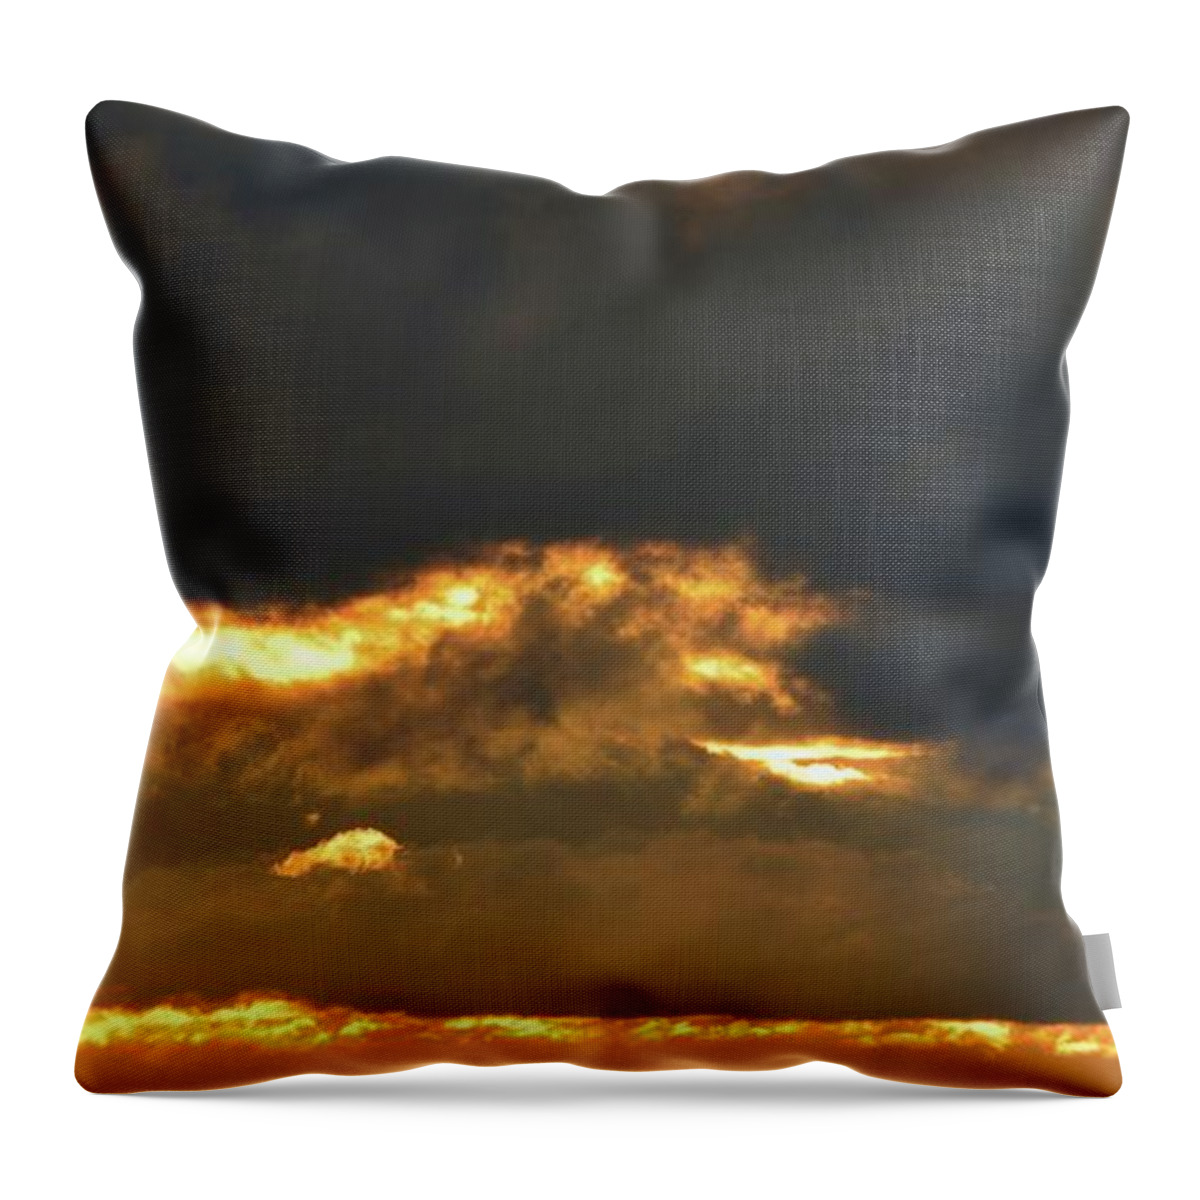 Abstract Throw Pillow featuring the digital art Orange Light In The Clouds by Lyle Crump